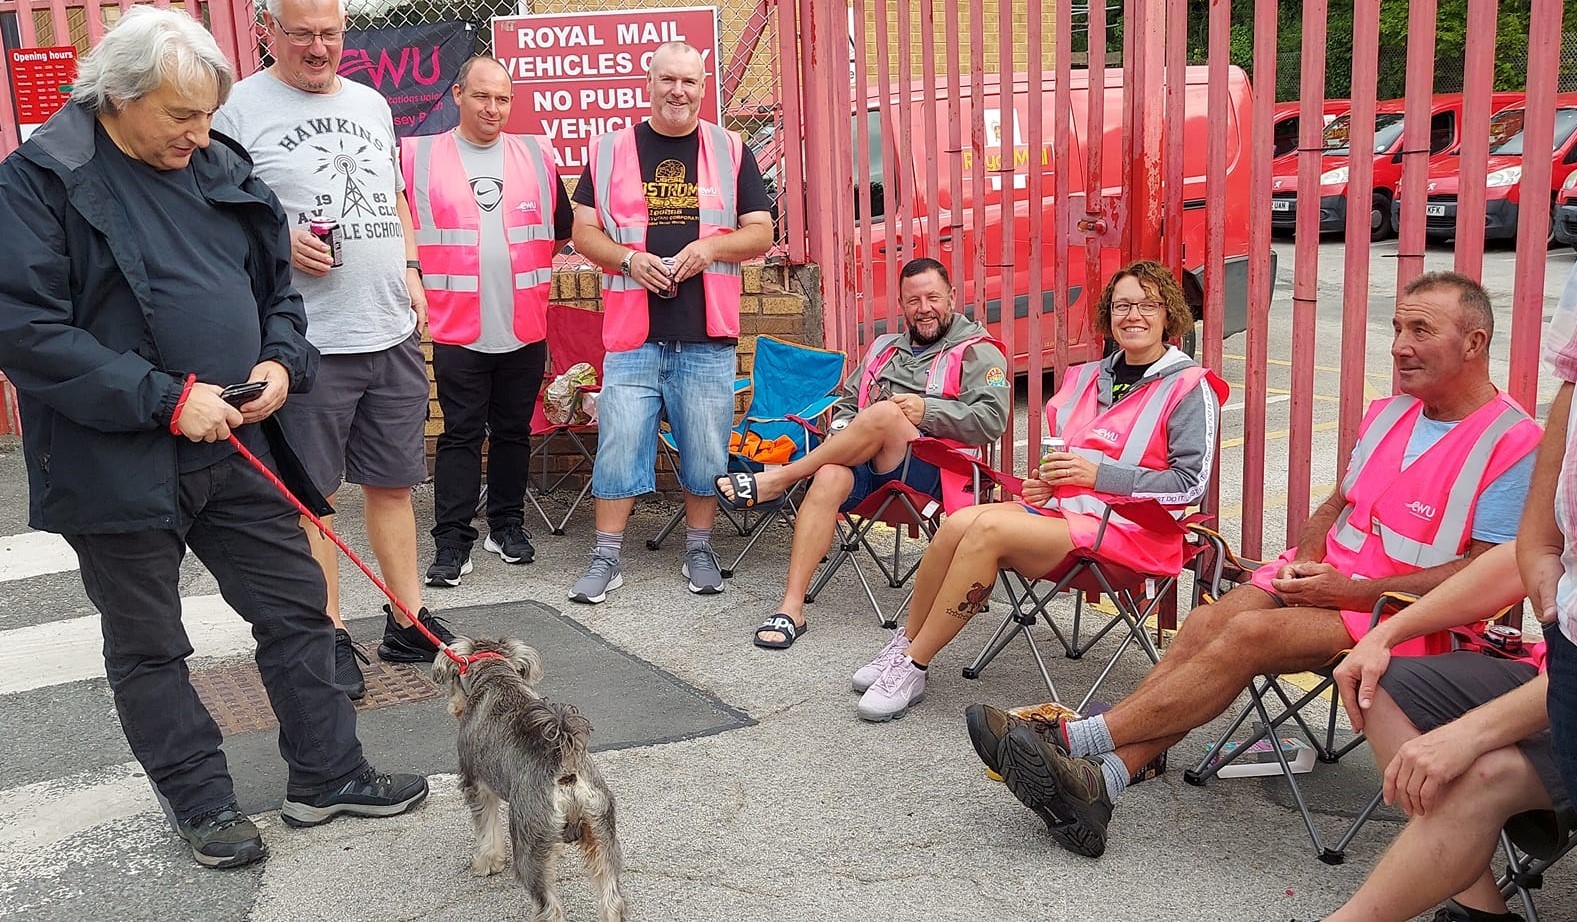 CWU members strike for a better pay deal. Pictured are CWU members on the Neston picket line. Photo by Felicity Dowling.